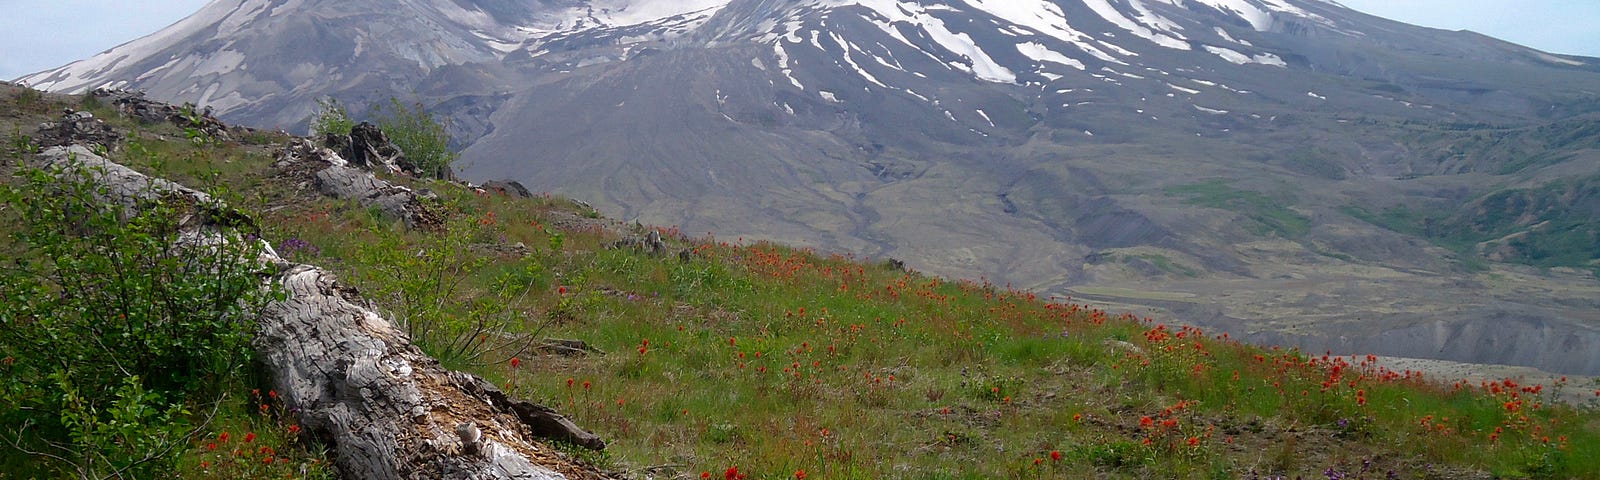 View of Mount Saint Helens from blast zone